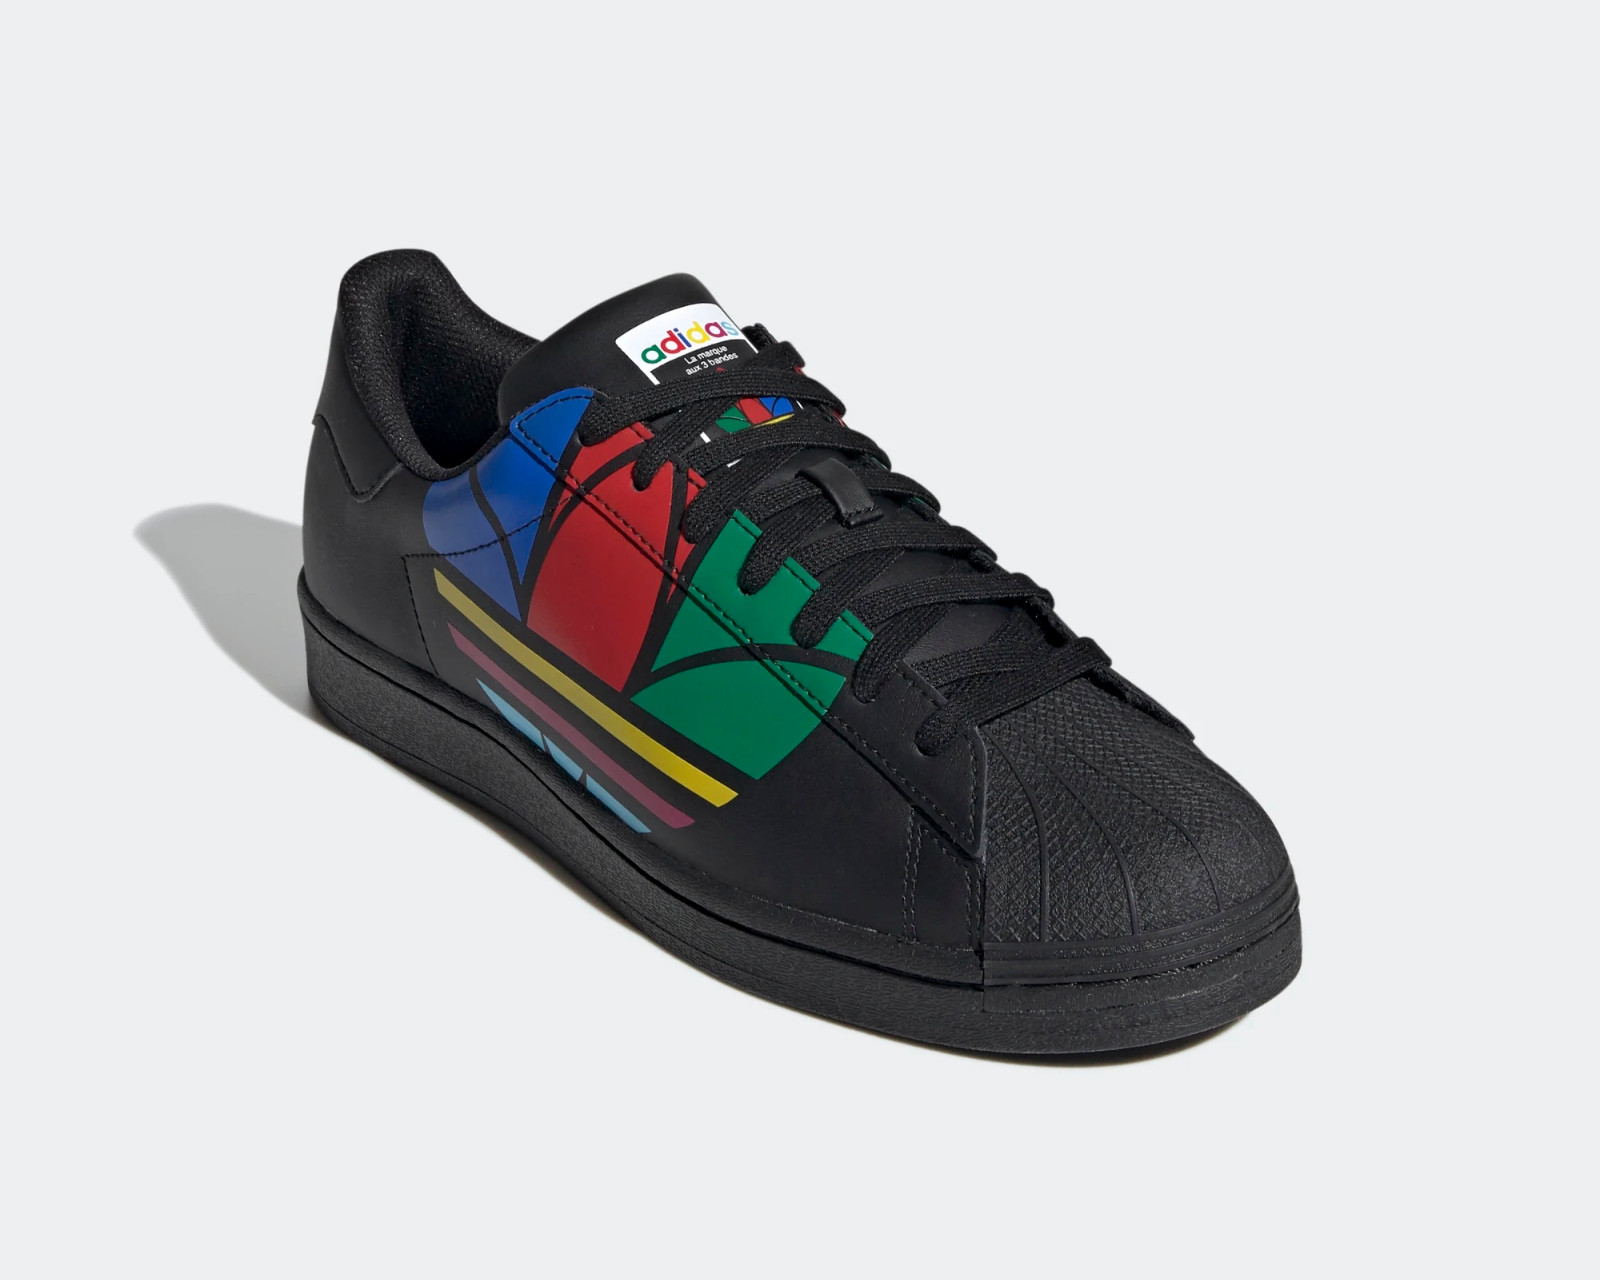 Adidas Superstar Pure Colorful Trefoil Core Black Blue Red